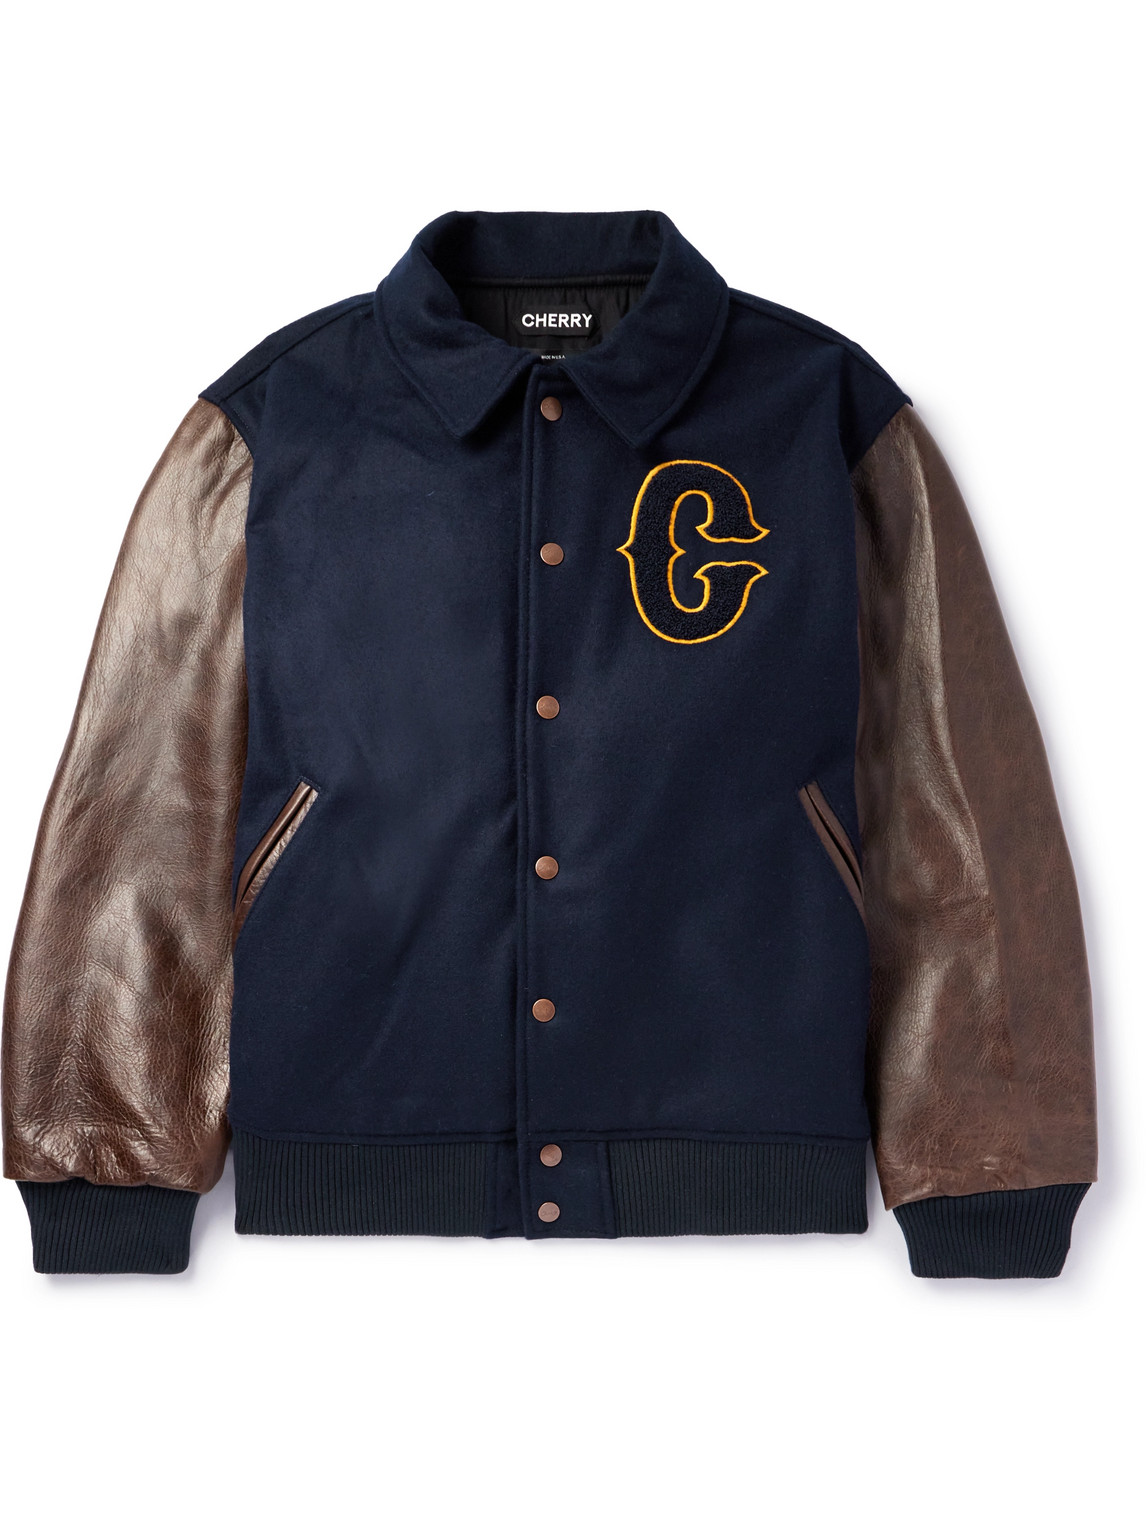 Cherry Los Angeles Rach Wear Appliqued Wool And Leather Varsity Jacket In Blue